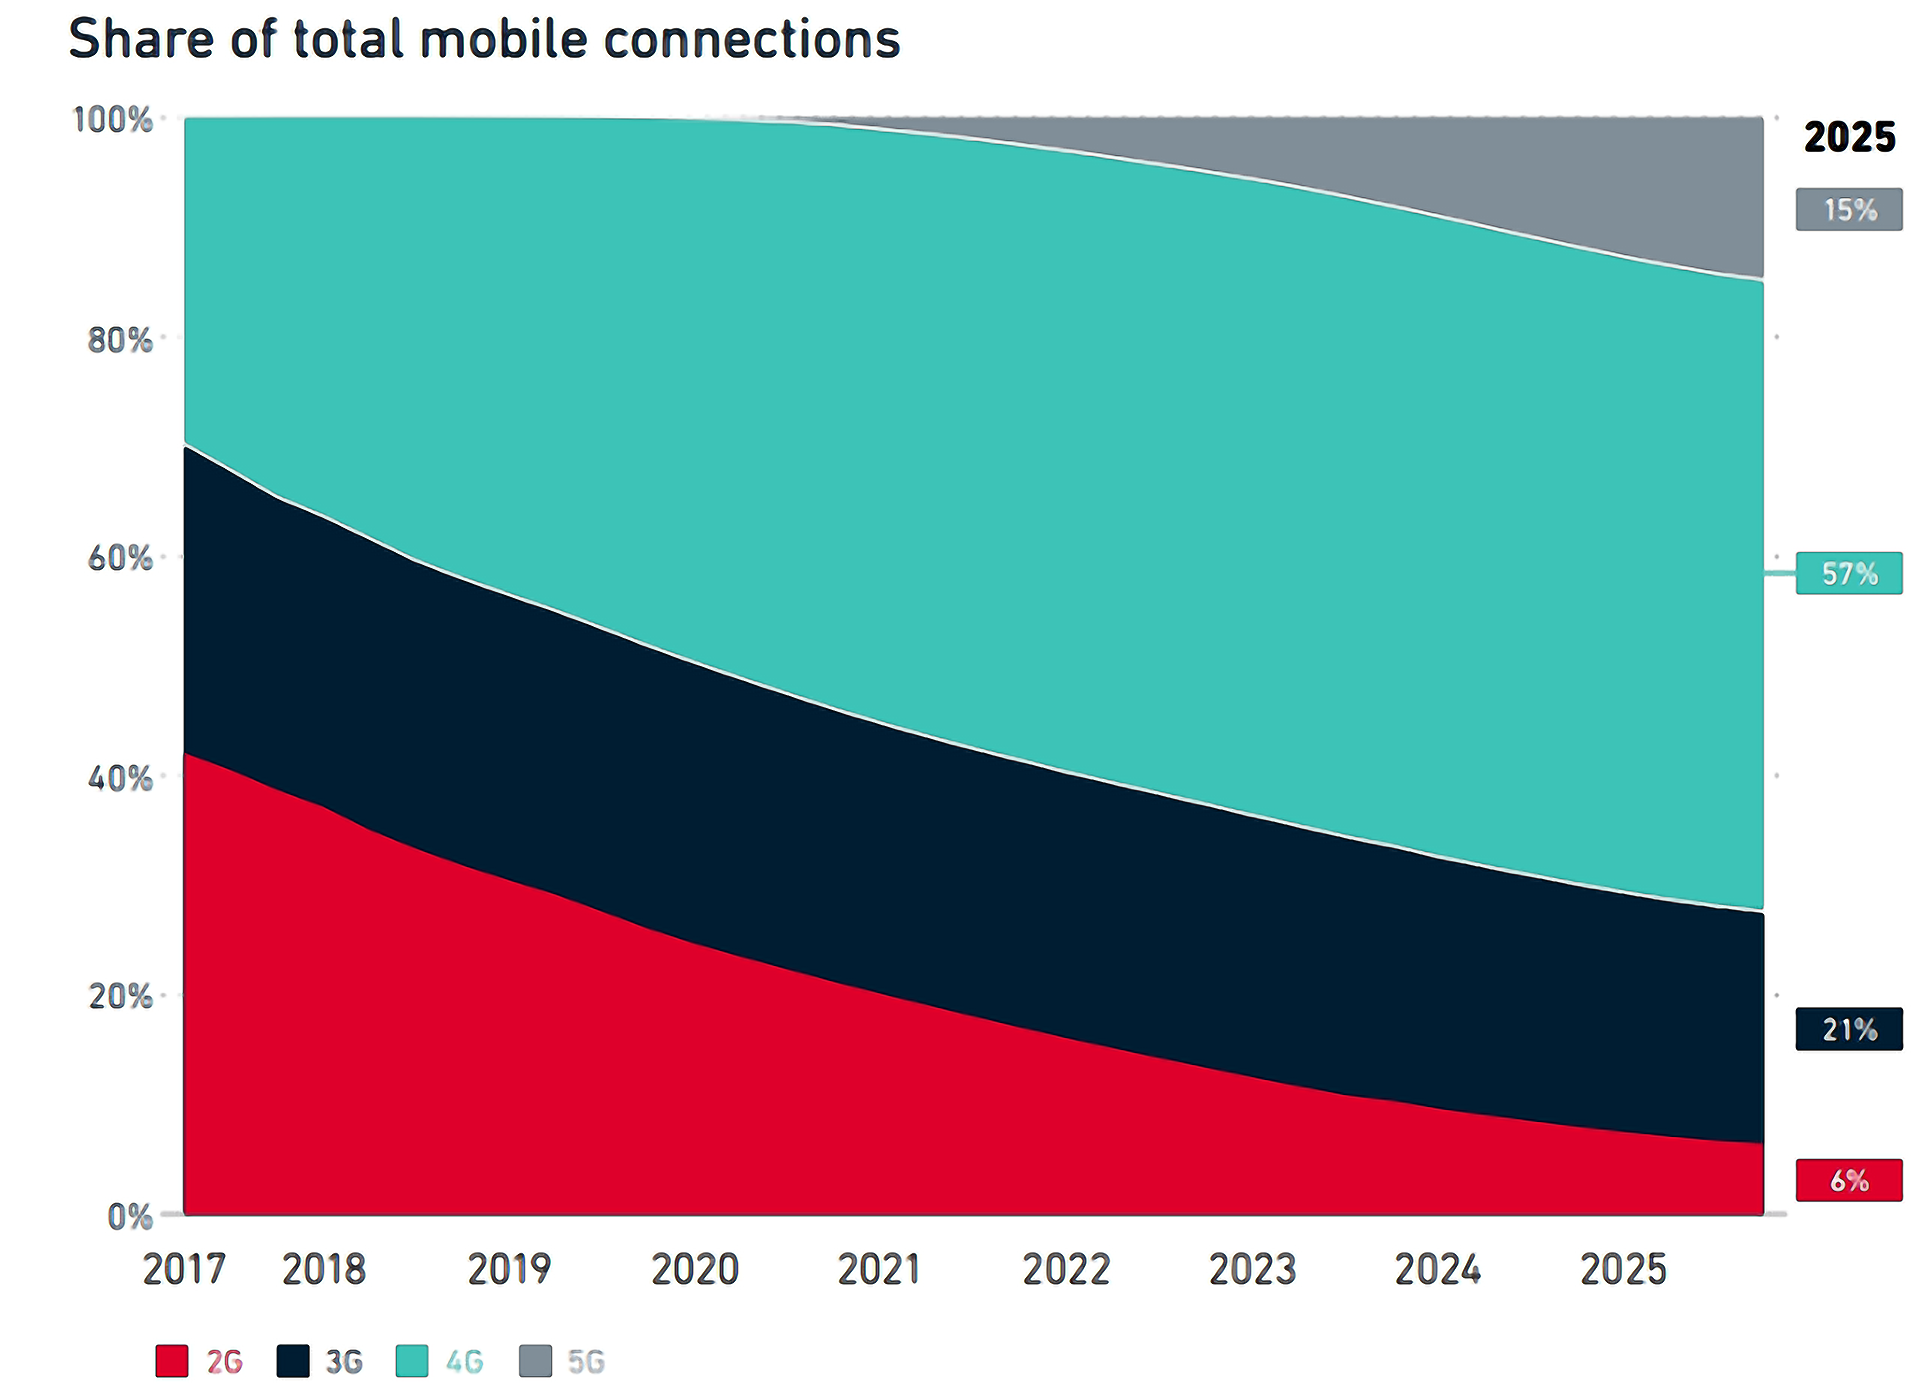 According to the “The Mobile Economy 2019” report by the World GSM Association GSMA, 5G technology is expected to run 15% of global mobile connections in 2025.